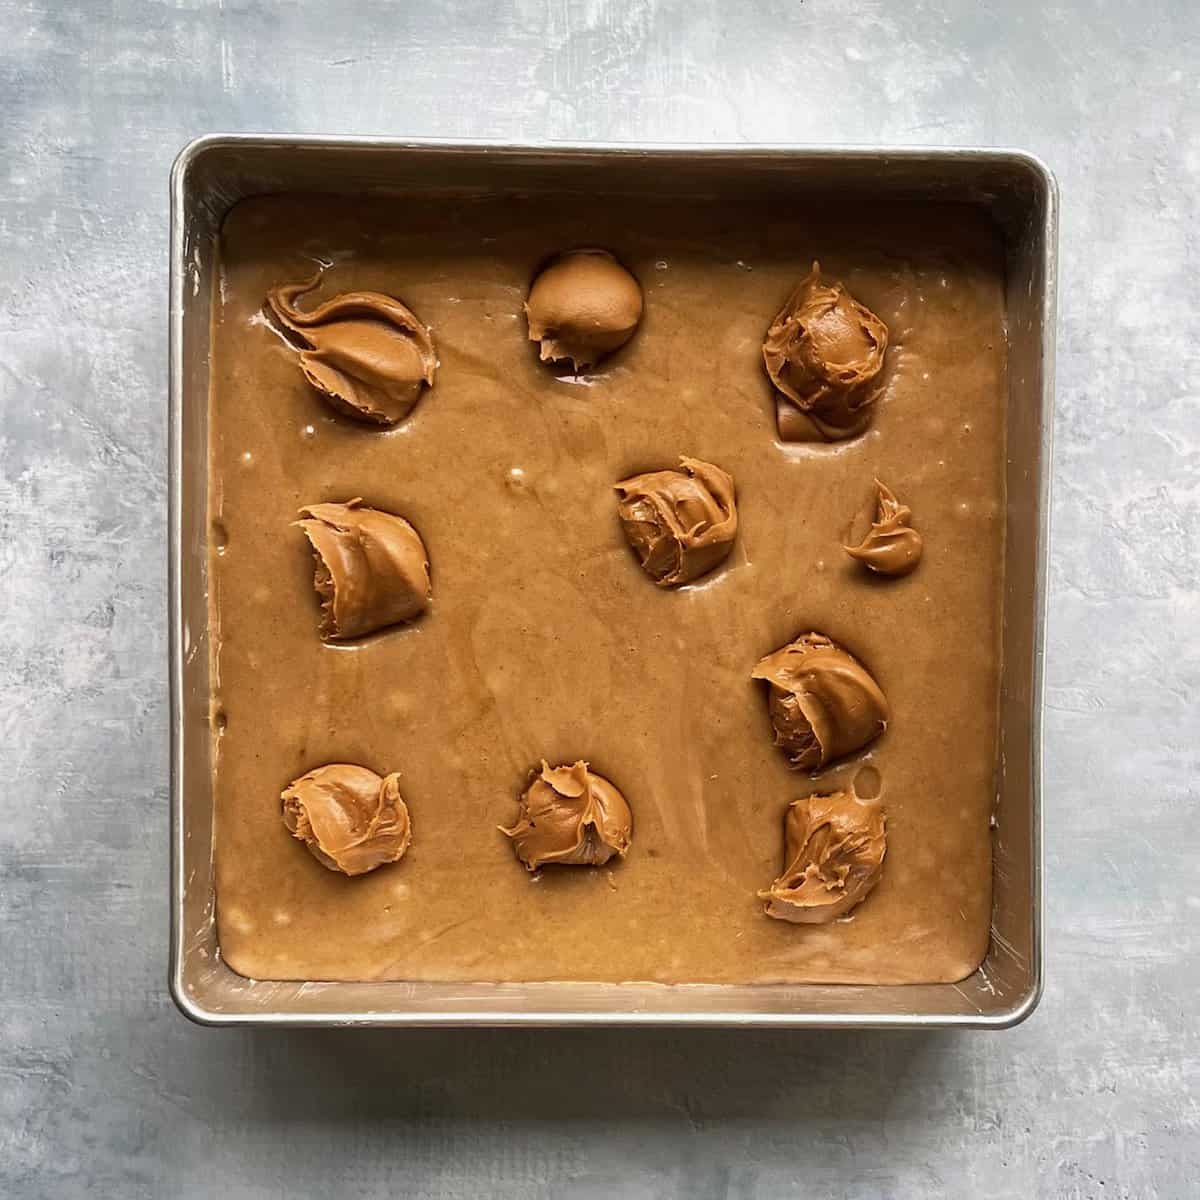 ten scoops of biscoff cookie butter on top of the blondie base in the baking pan.